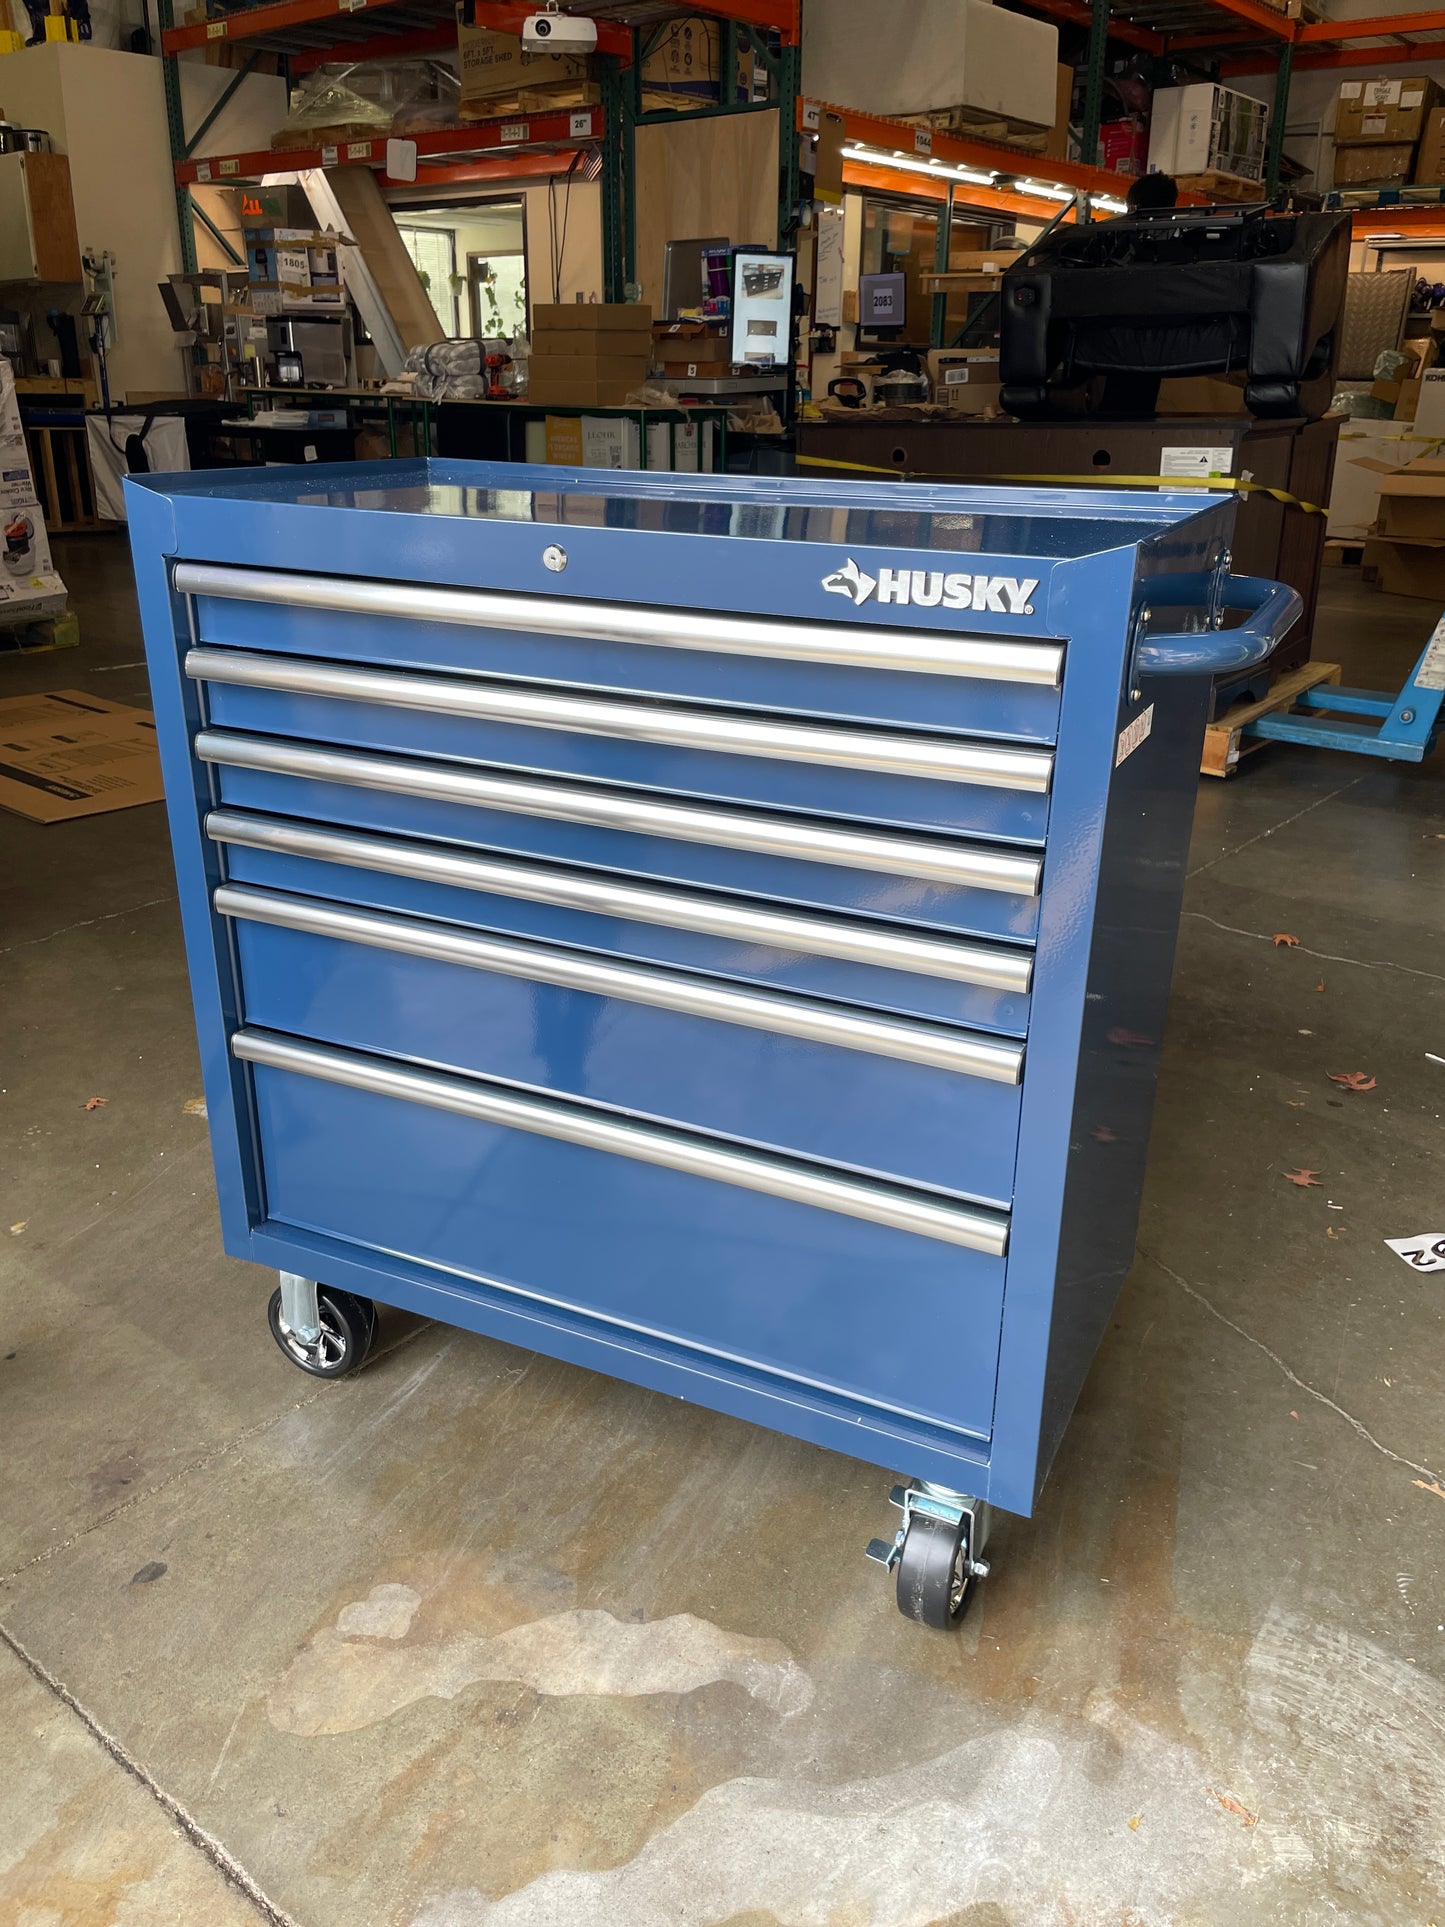 NEW IN BOX - Husky 36" 6-Drawer Blue Tool Chest - Retail $499